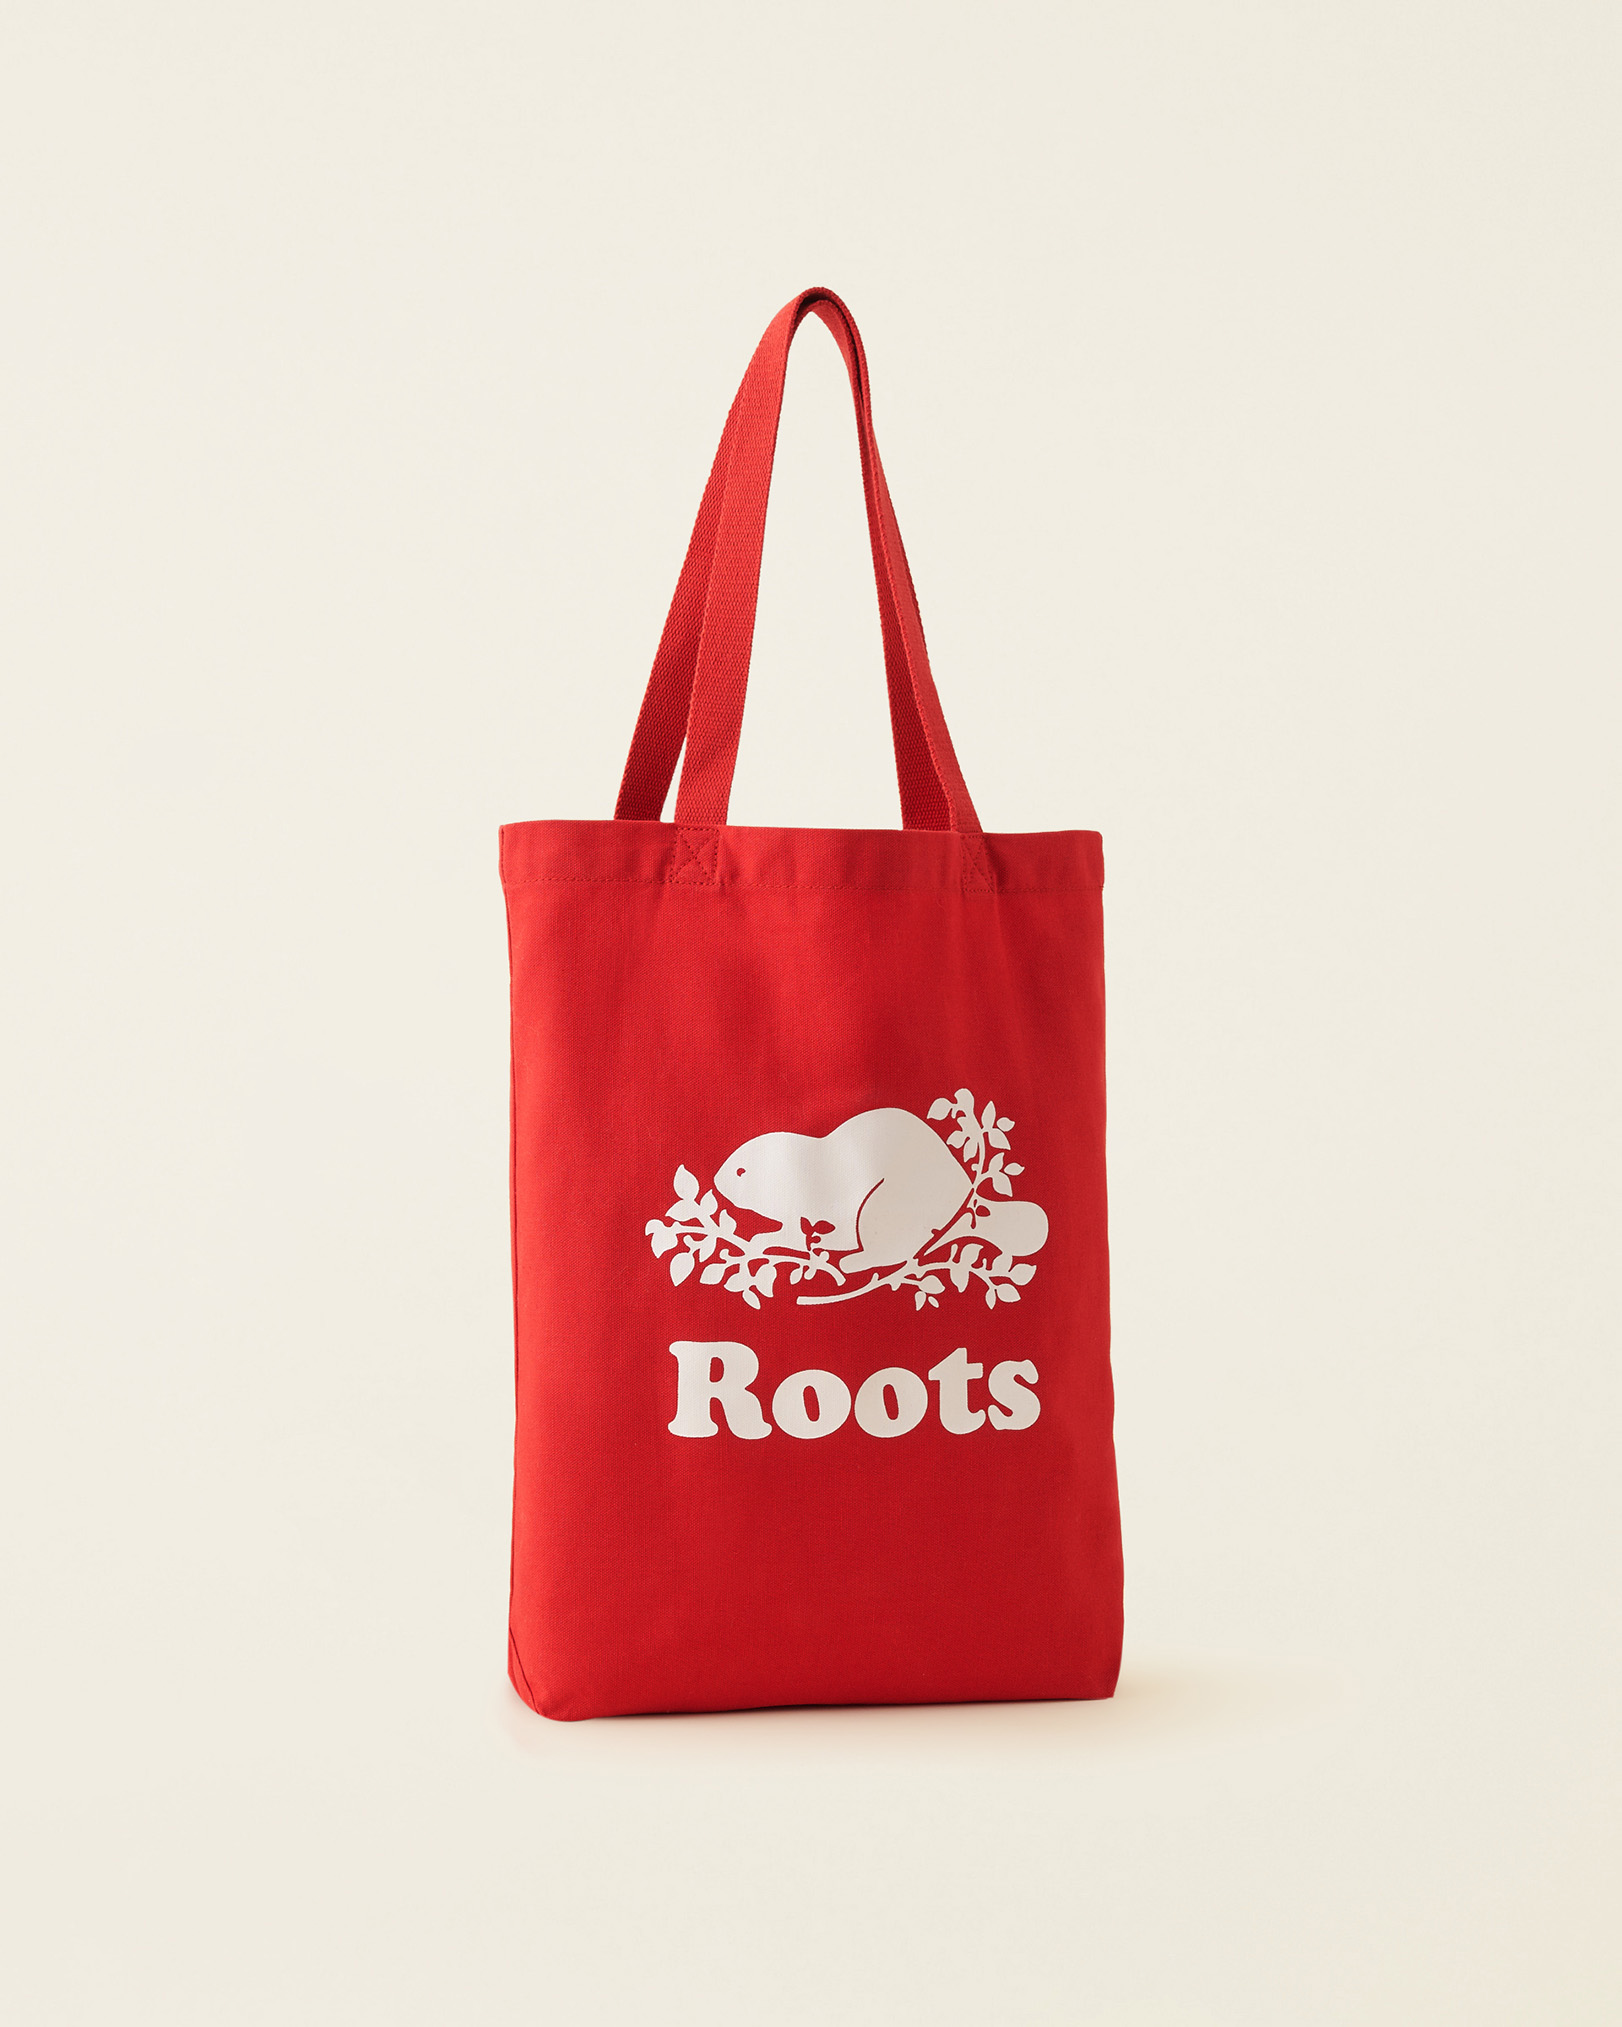 Roots Cooper Tote in Jam Red